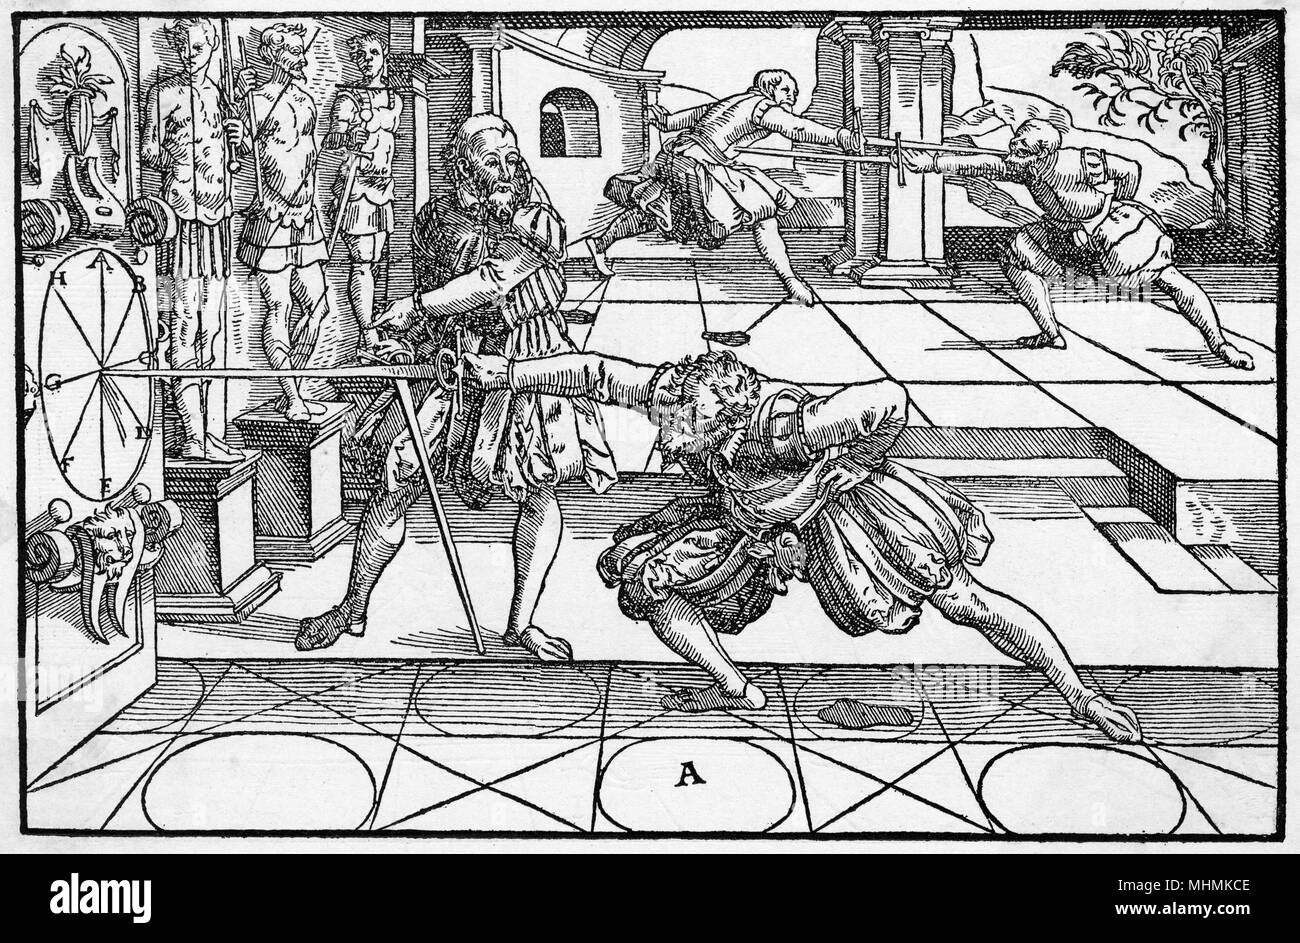 A fencer practises his thrust by aiming at a mounted target.       Date: 1570 Stock Photo